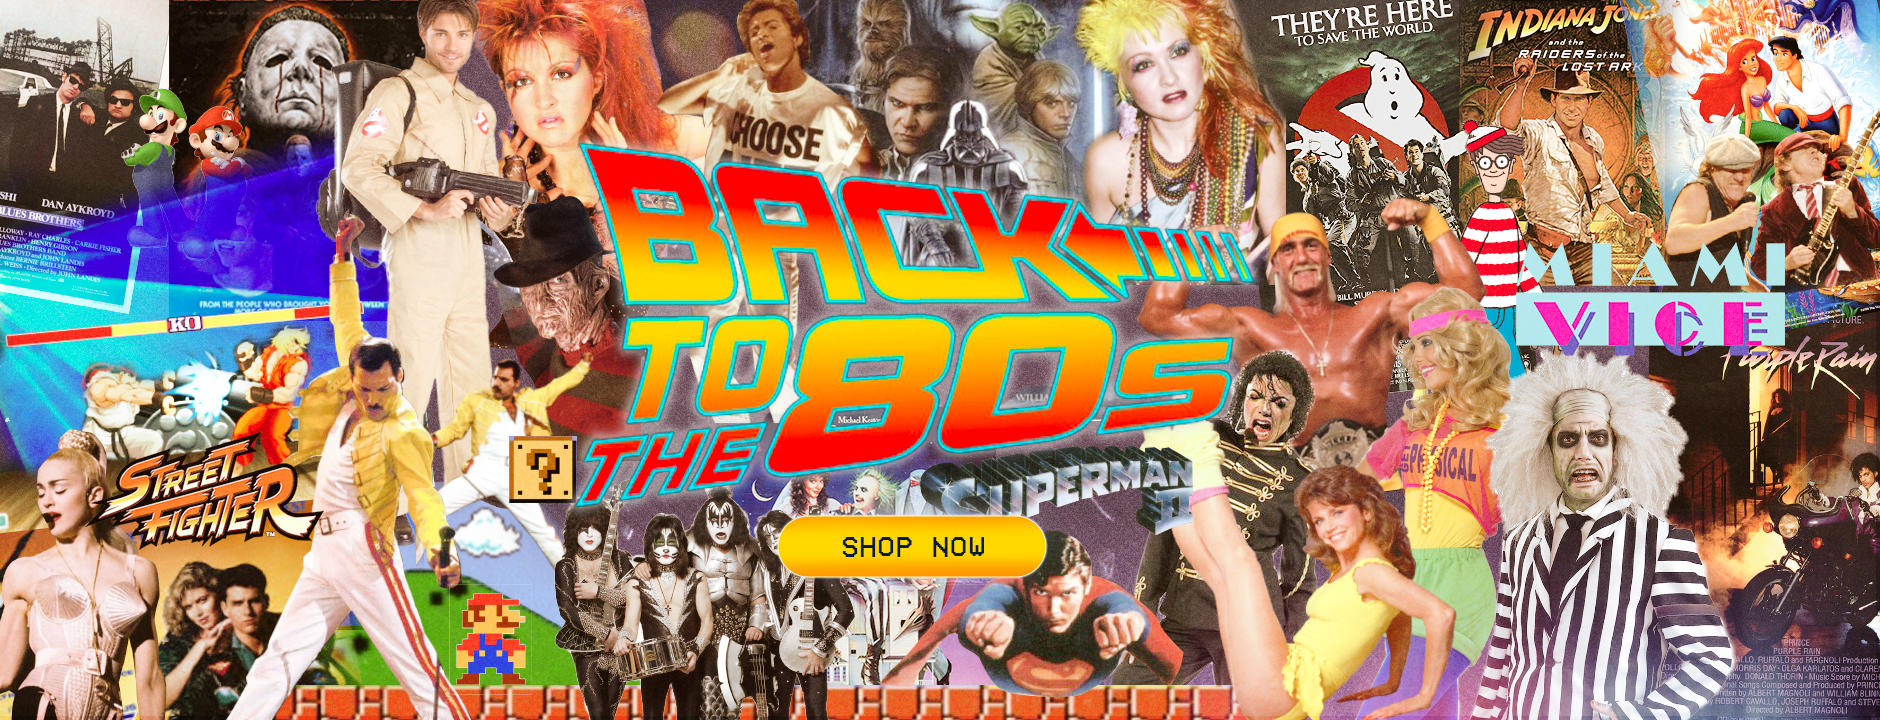 1980's costumes for sale